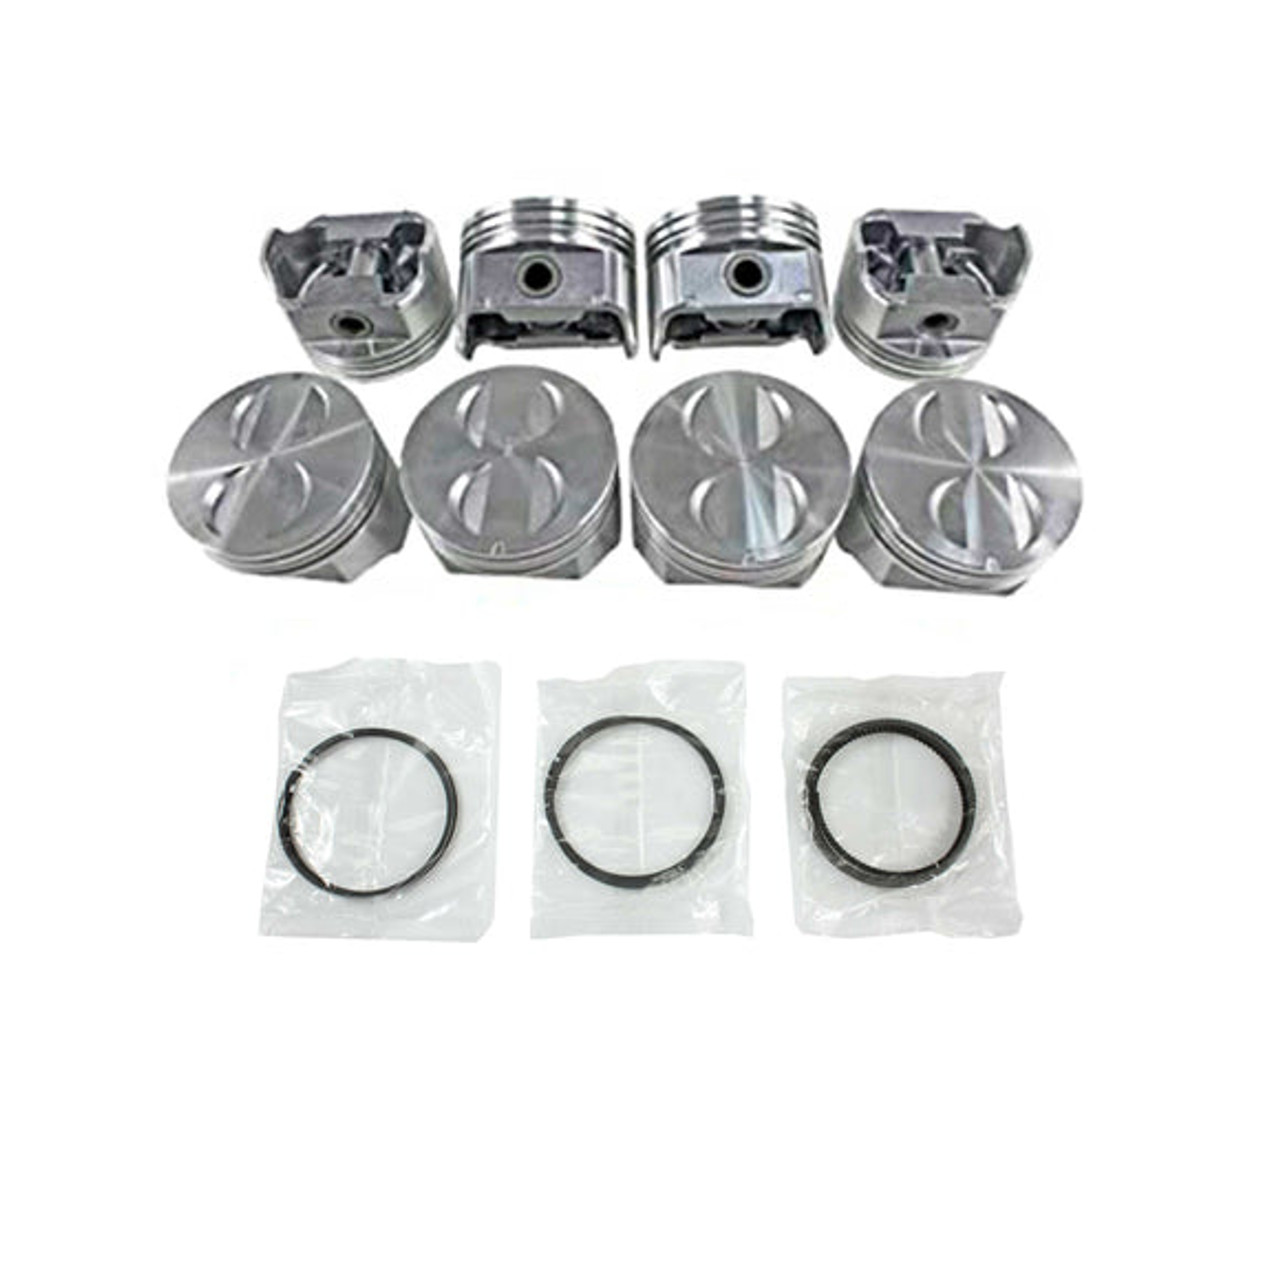 Piston Set with Rings - 2016 GMC Acadia 3.6L Engine Parts # PRK3212ZE77